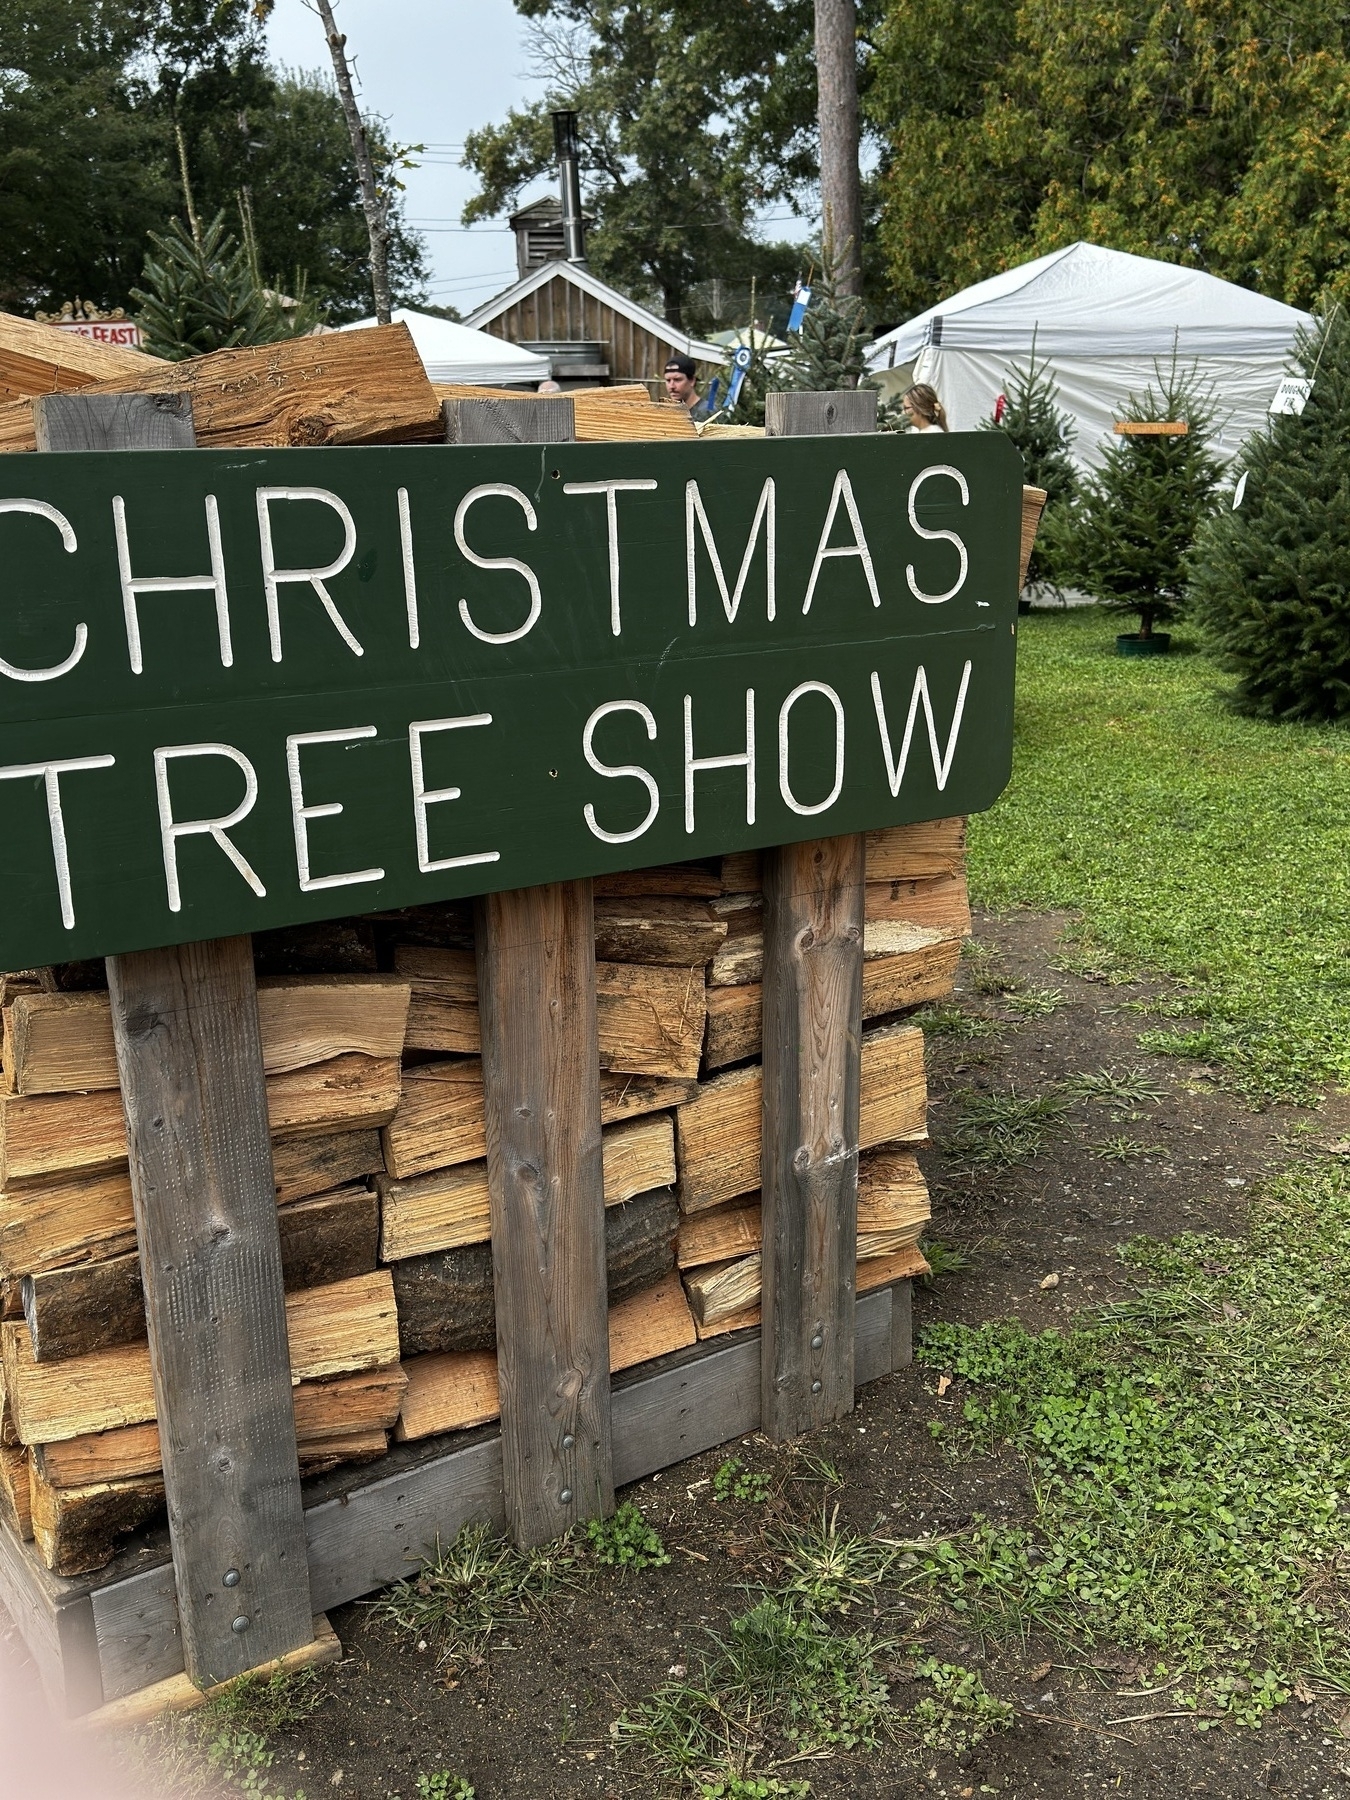 Cord of firewood with sign reading "Christmas Tree Show"